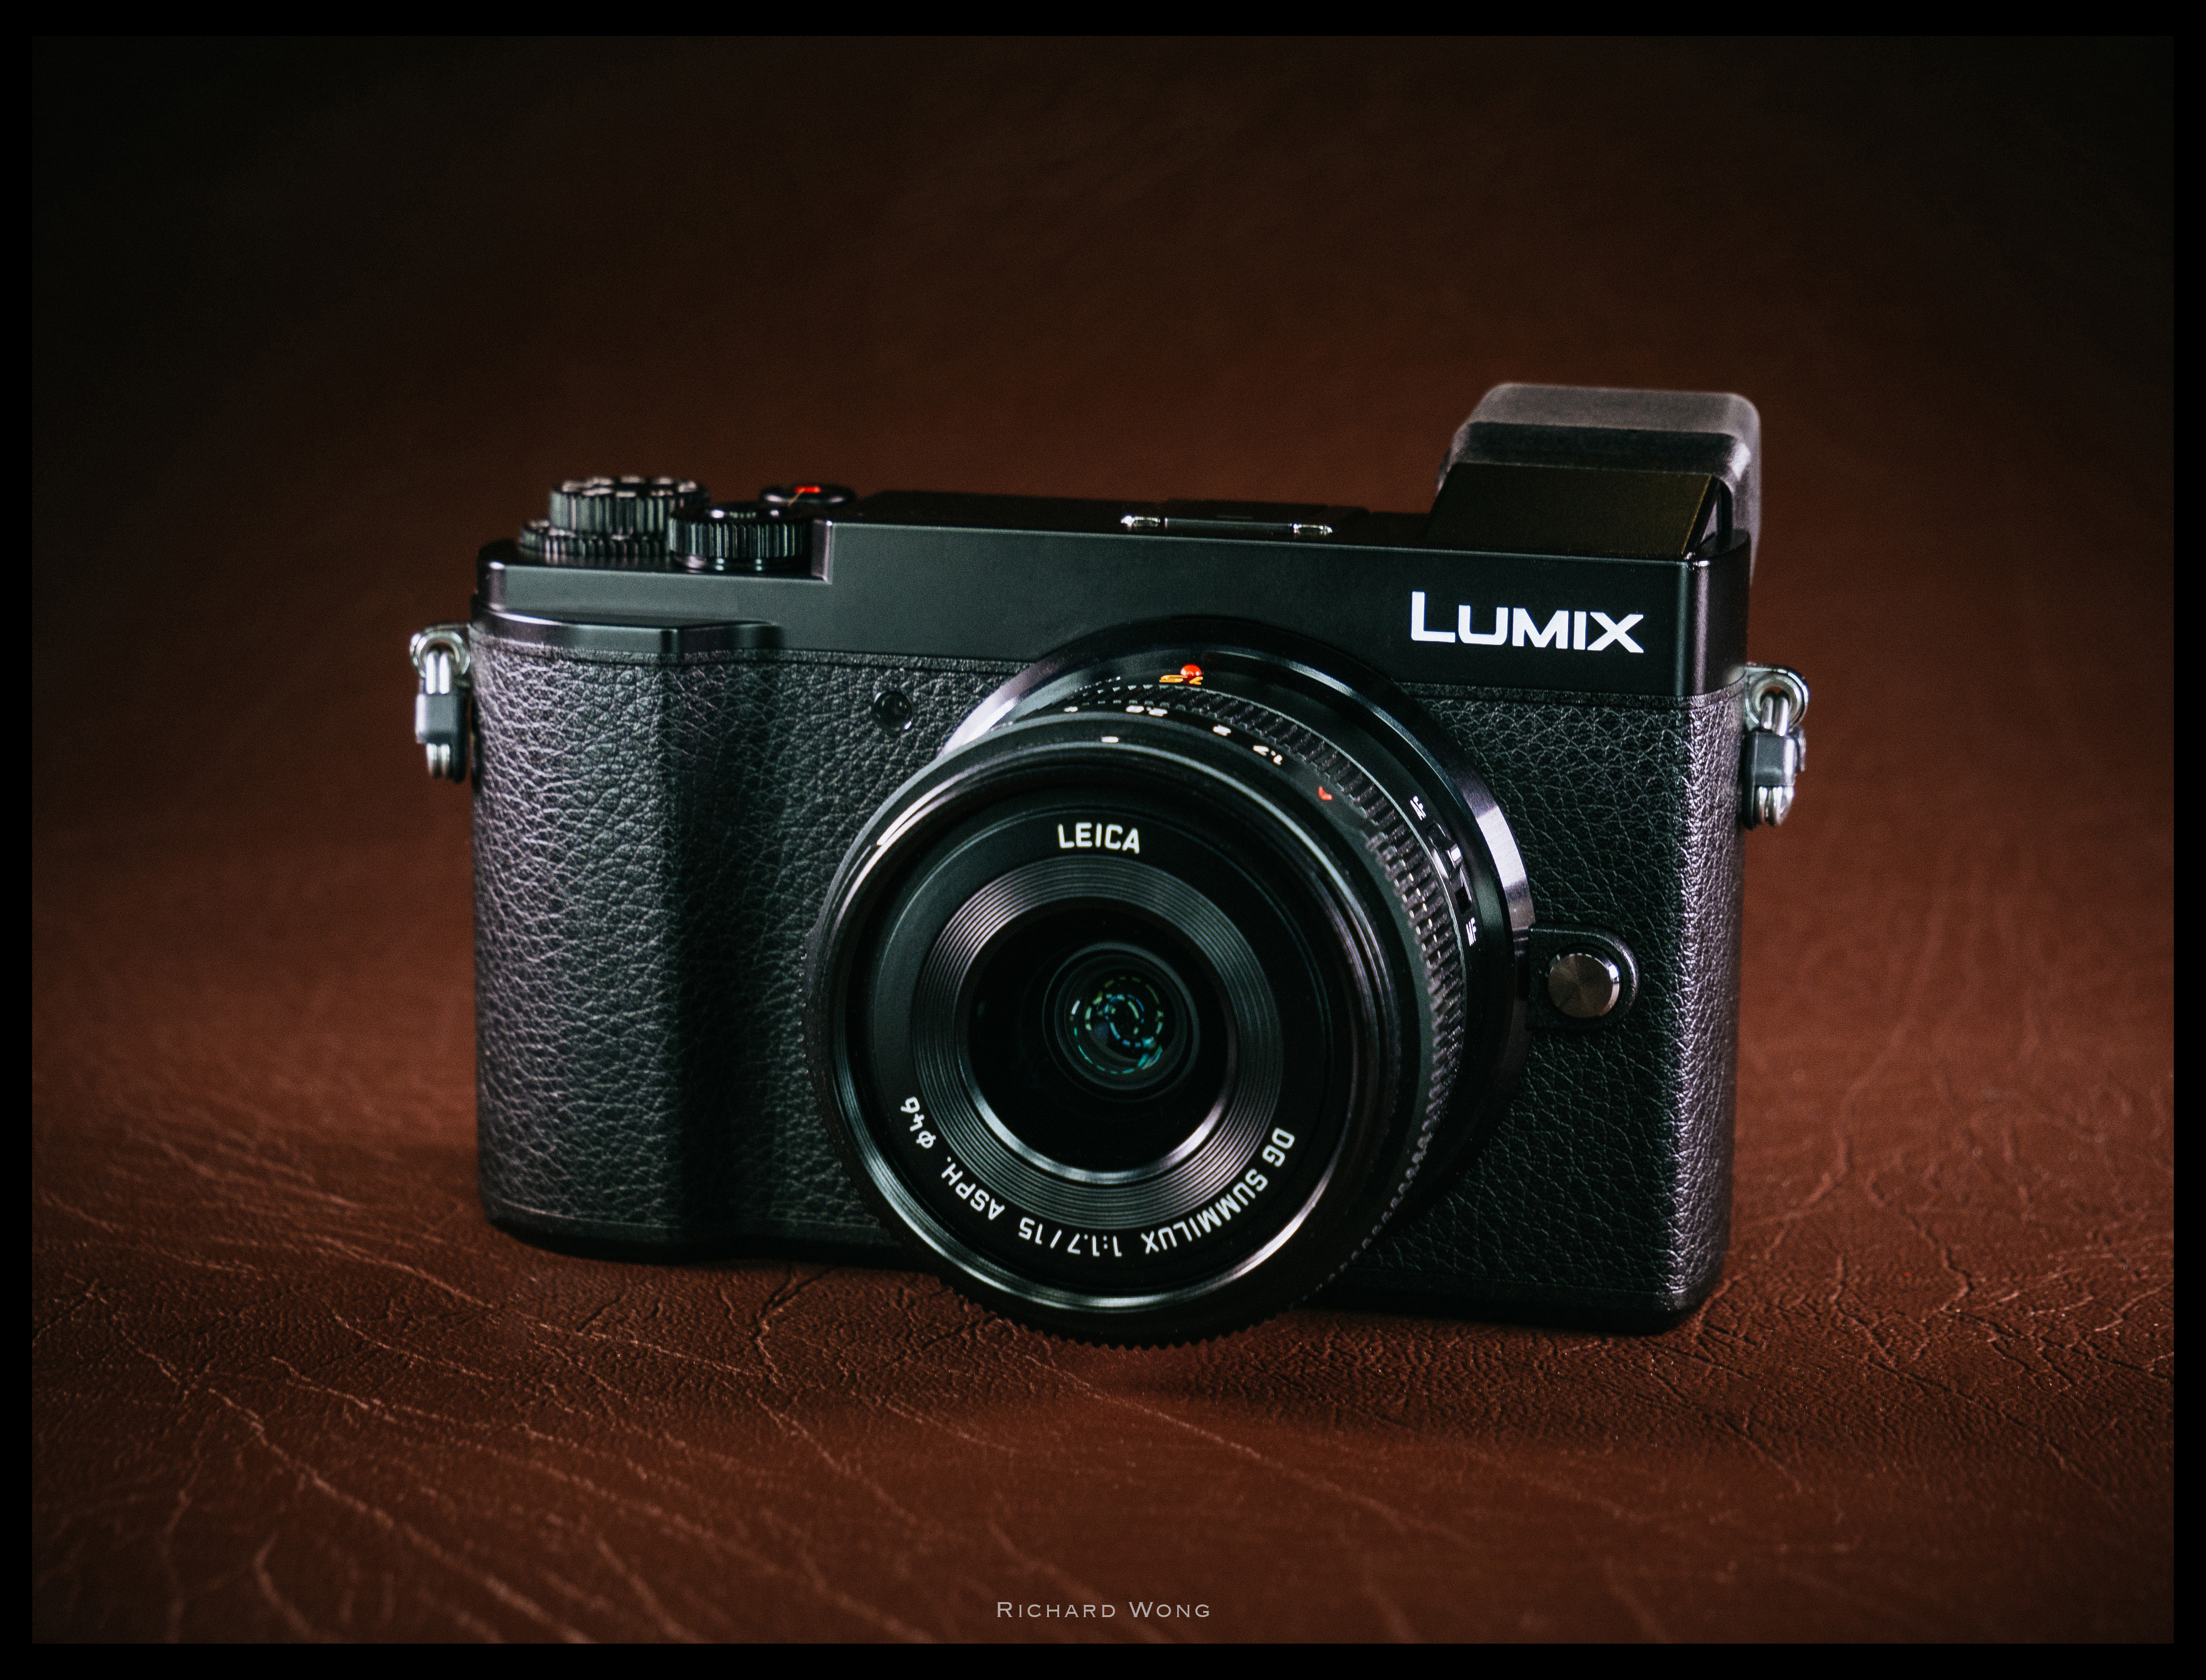 Gematigd duurzame grondstof interferentie Panasonic Lumix GX9 Review – the best street photography camera? – Review  By Richard